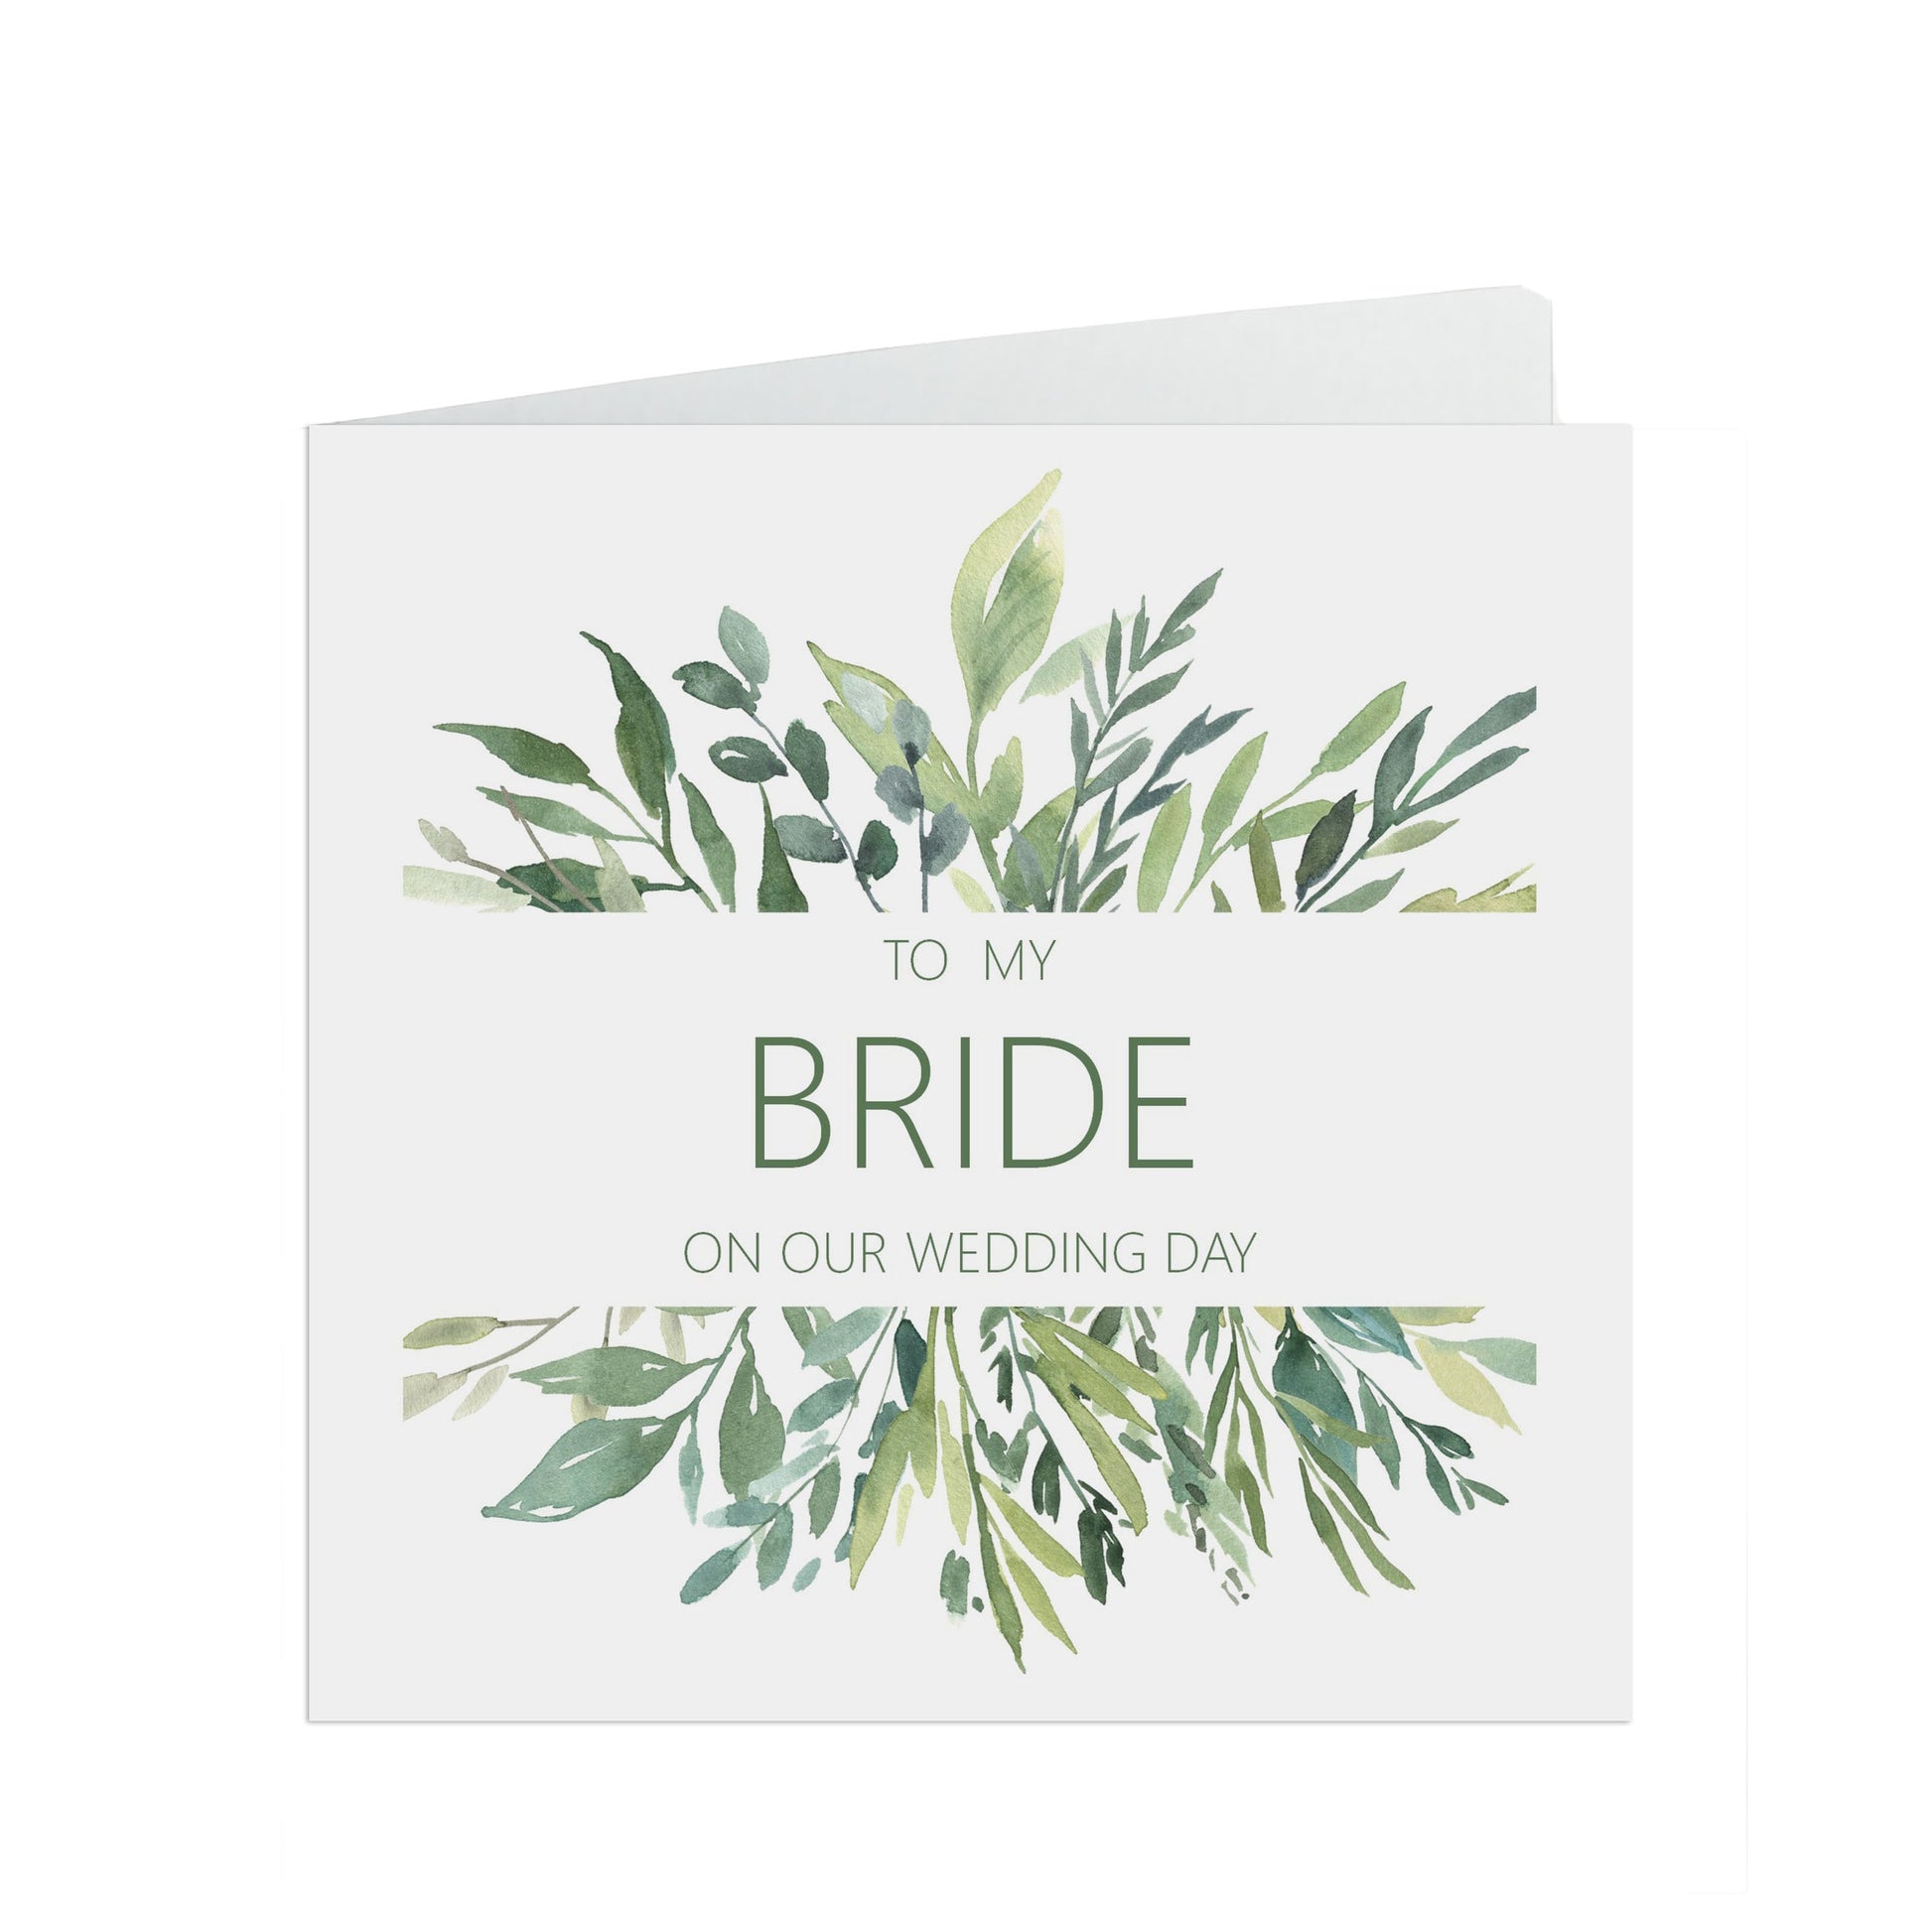 Bride On Our Wedding Day Card, Greenery 6x6 Inches With A Kraft Envelope